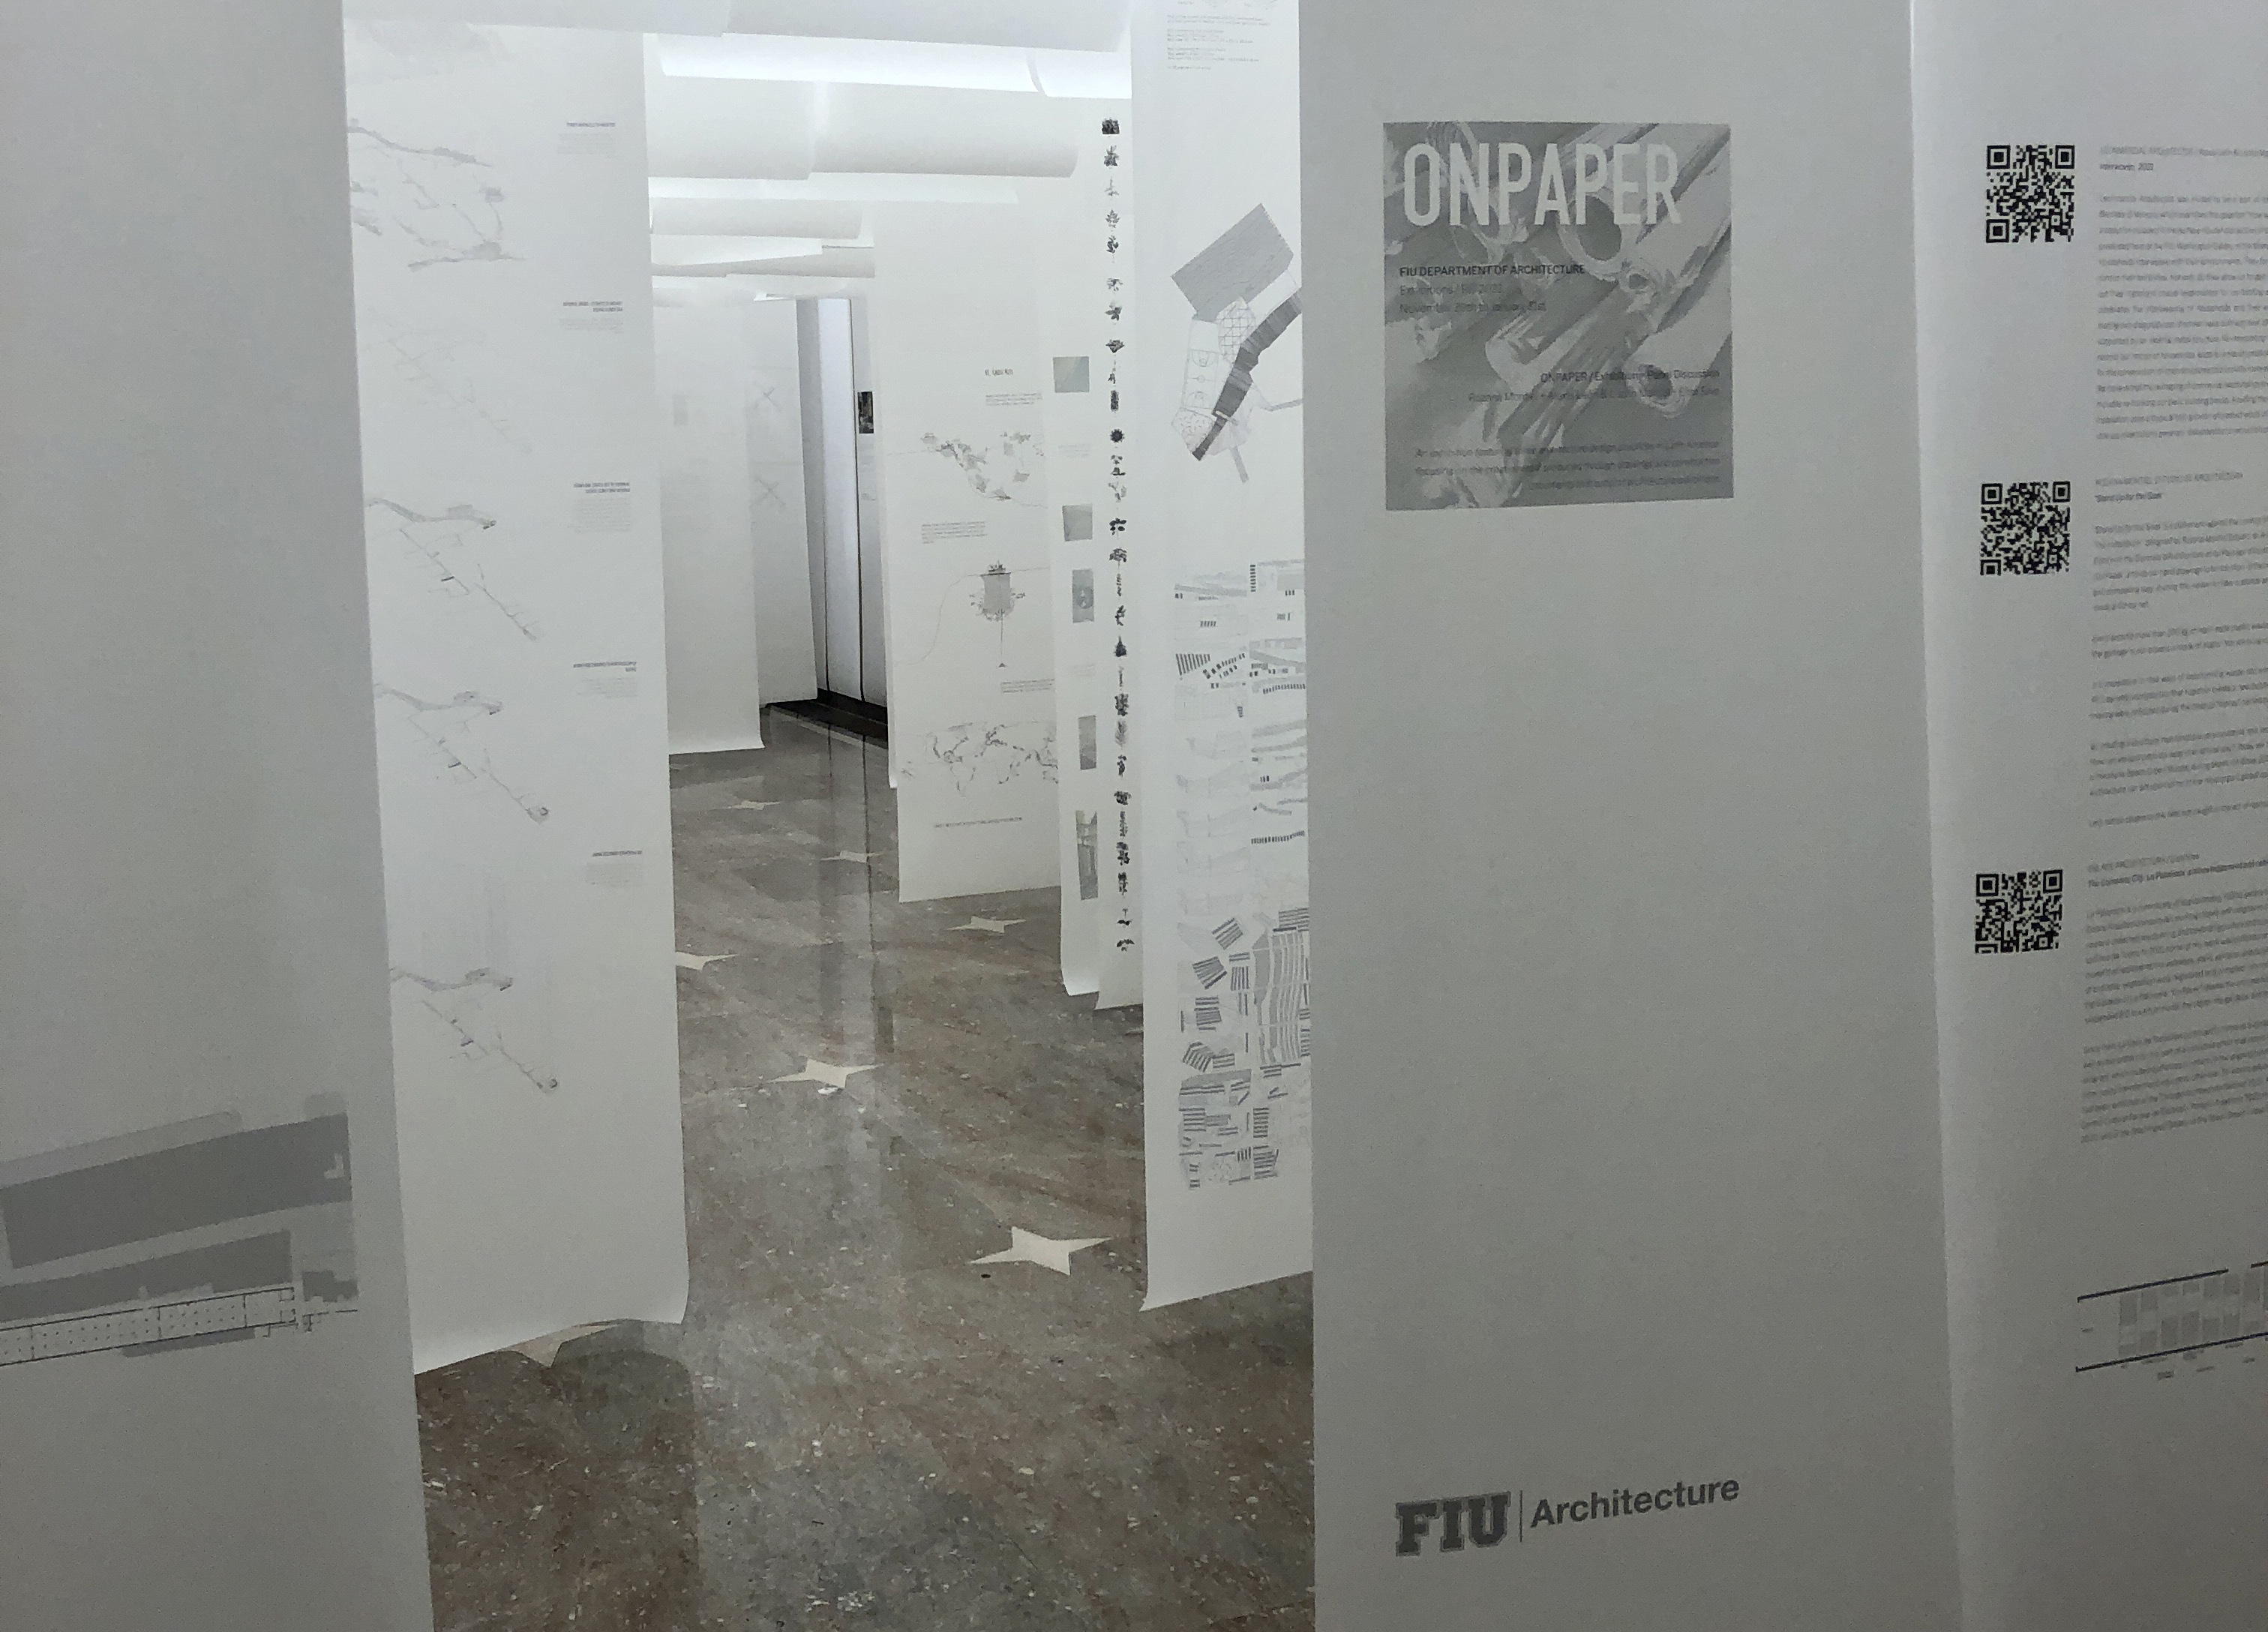 Exhibition “ON PAPER”